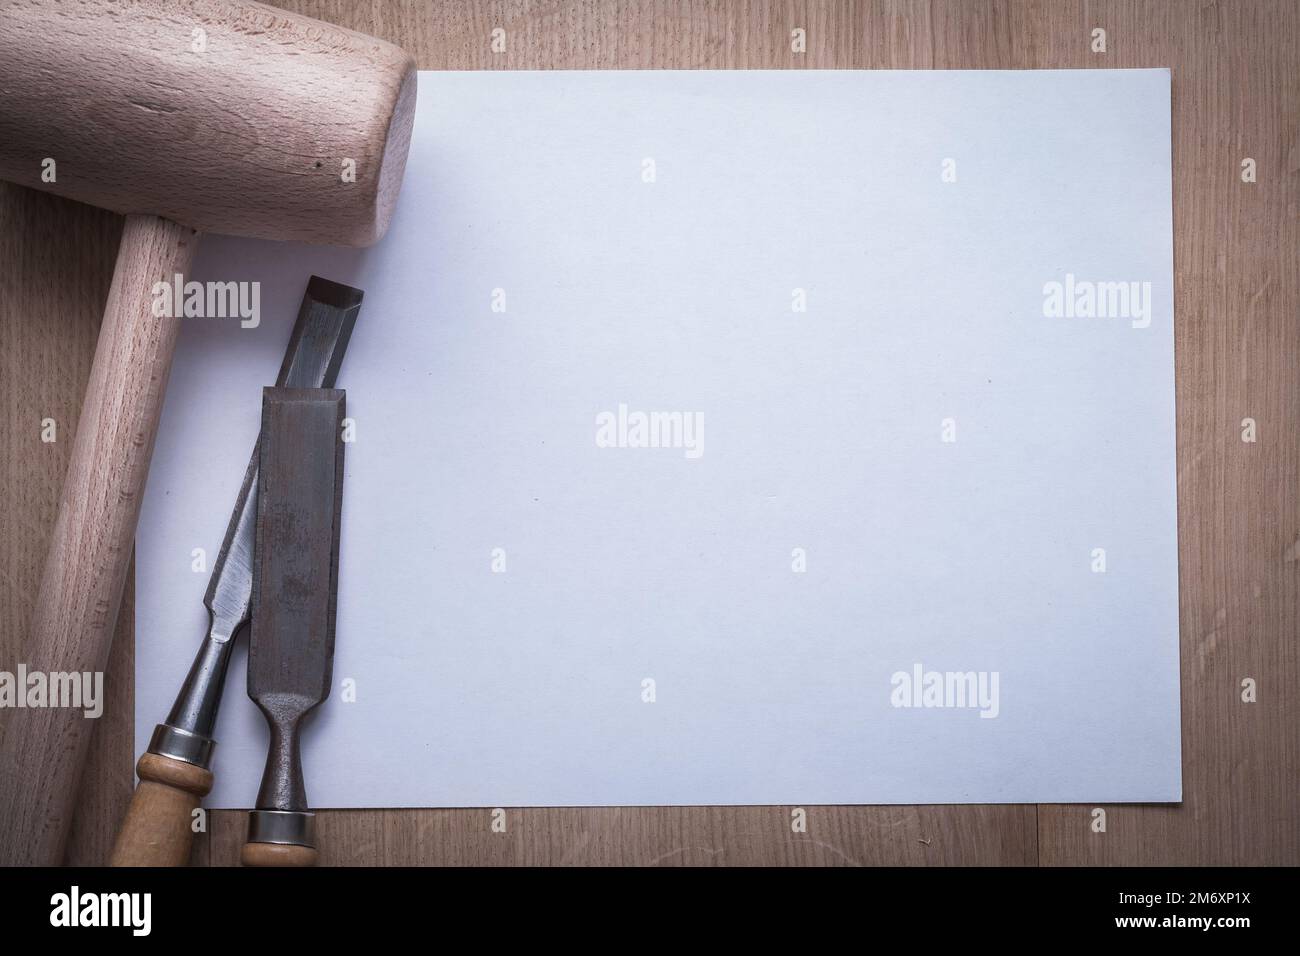 Metal firmer chisels lump hammer and blank sheet of paper on wooden board copy space construction concept. Stock Photo